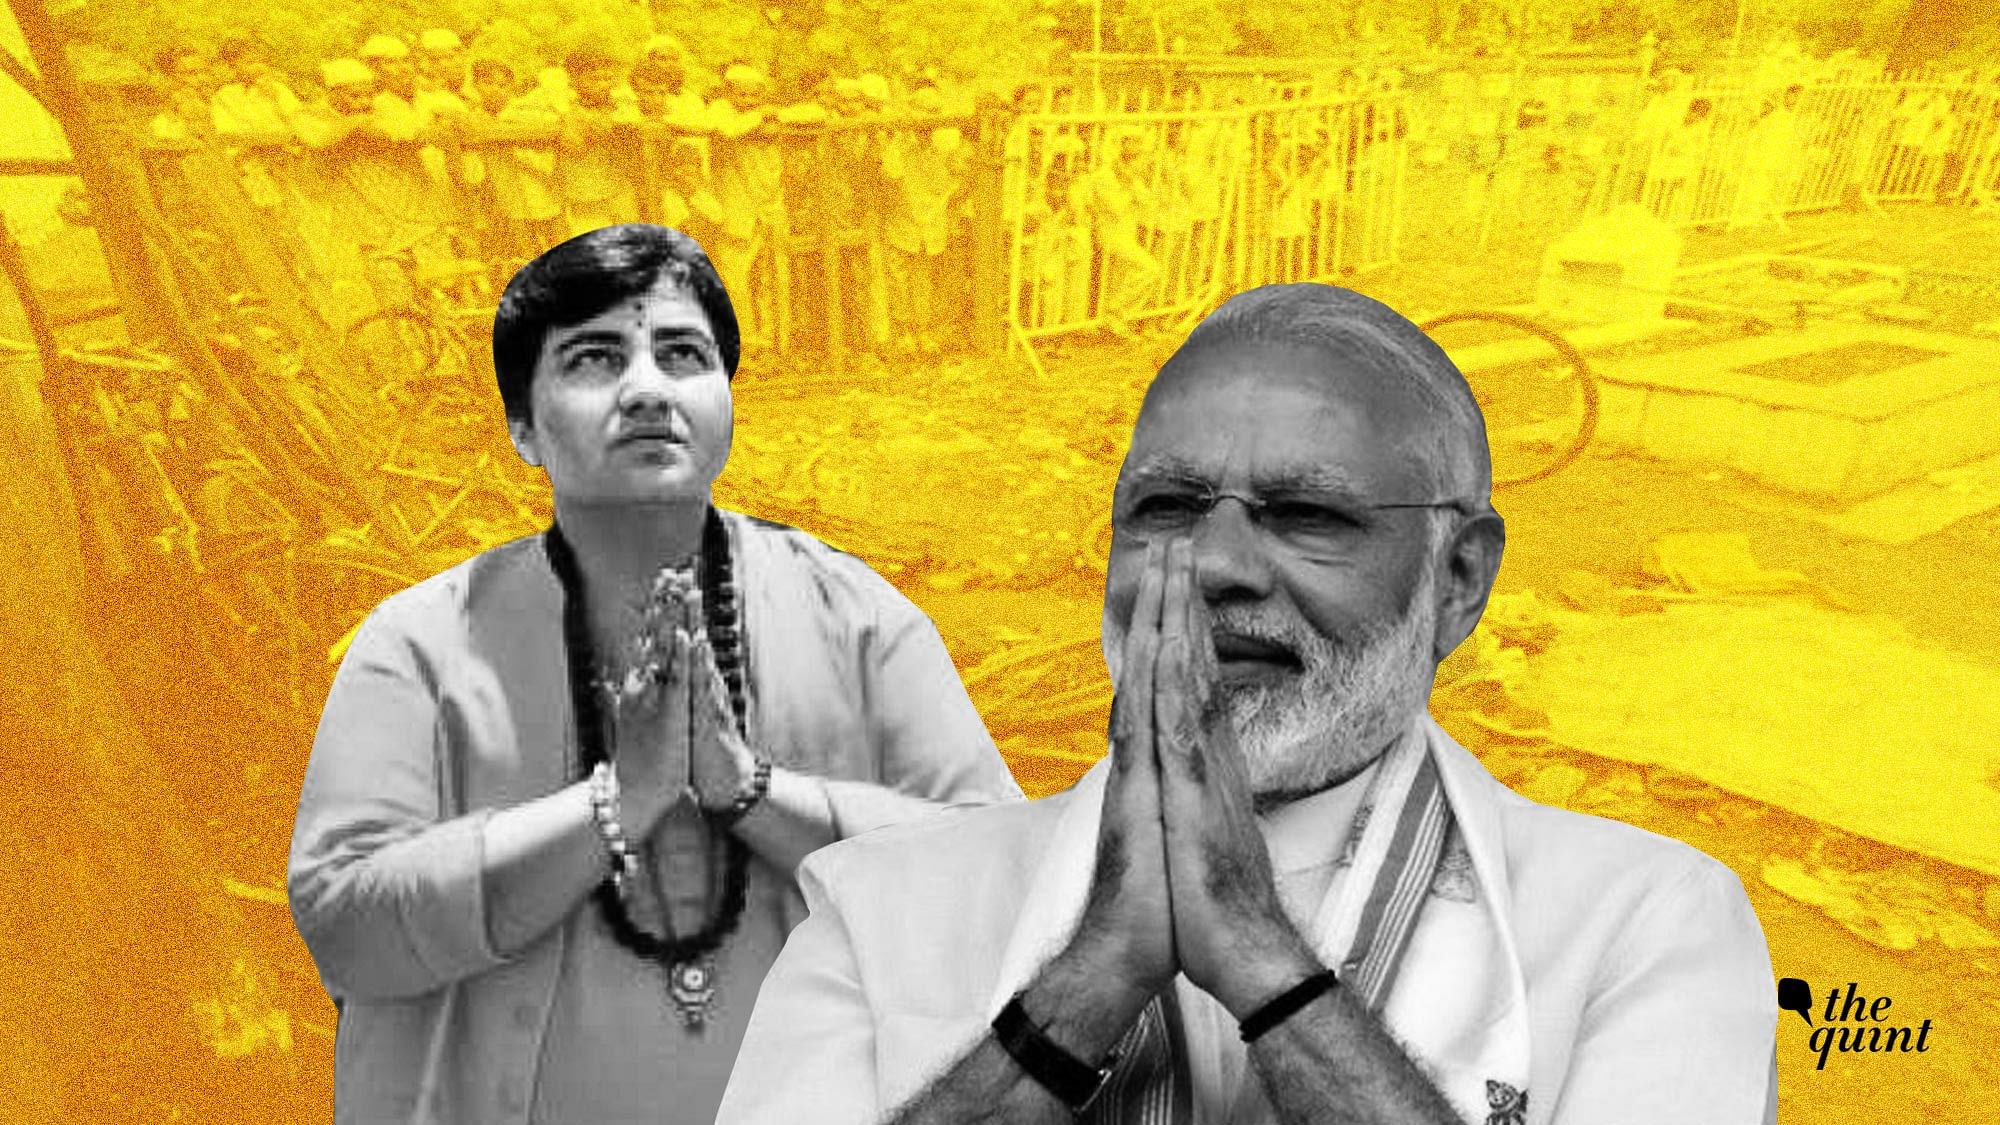 71 former IAS, IFS, IPS officers have condemned the nomination of Sadhvi Pragya Thakur in the Lok Sabha Elections in an open letter to PM Modi